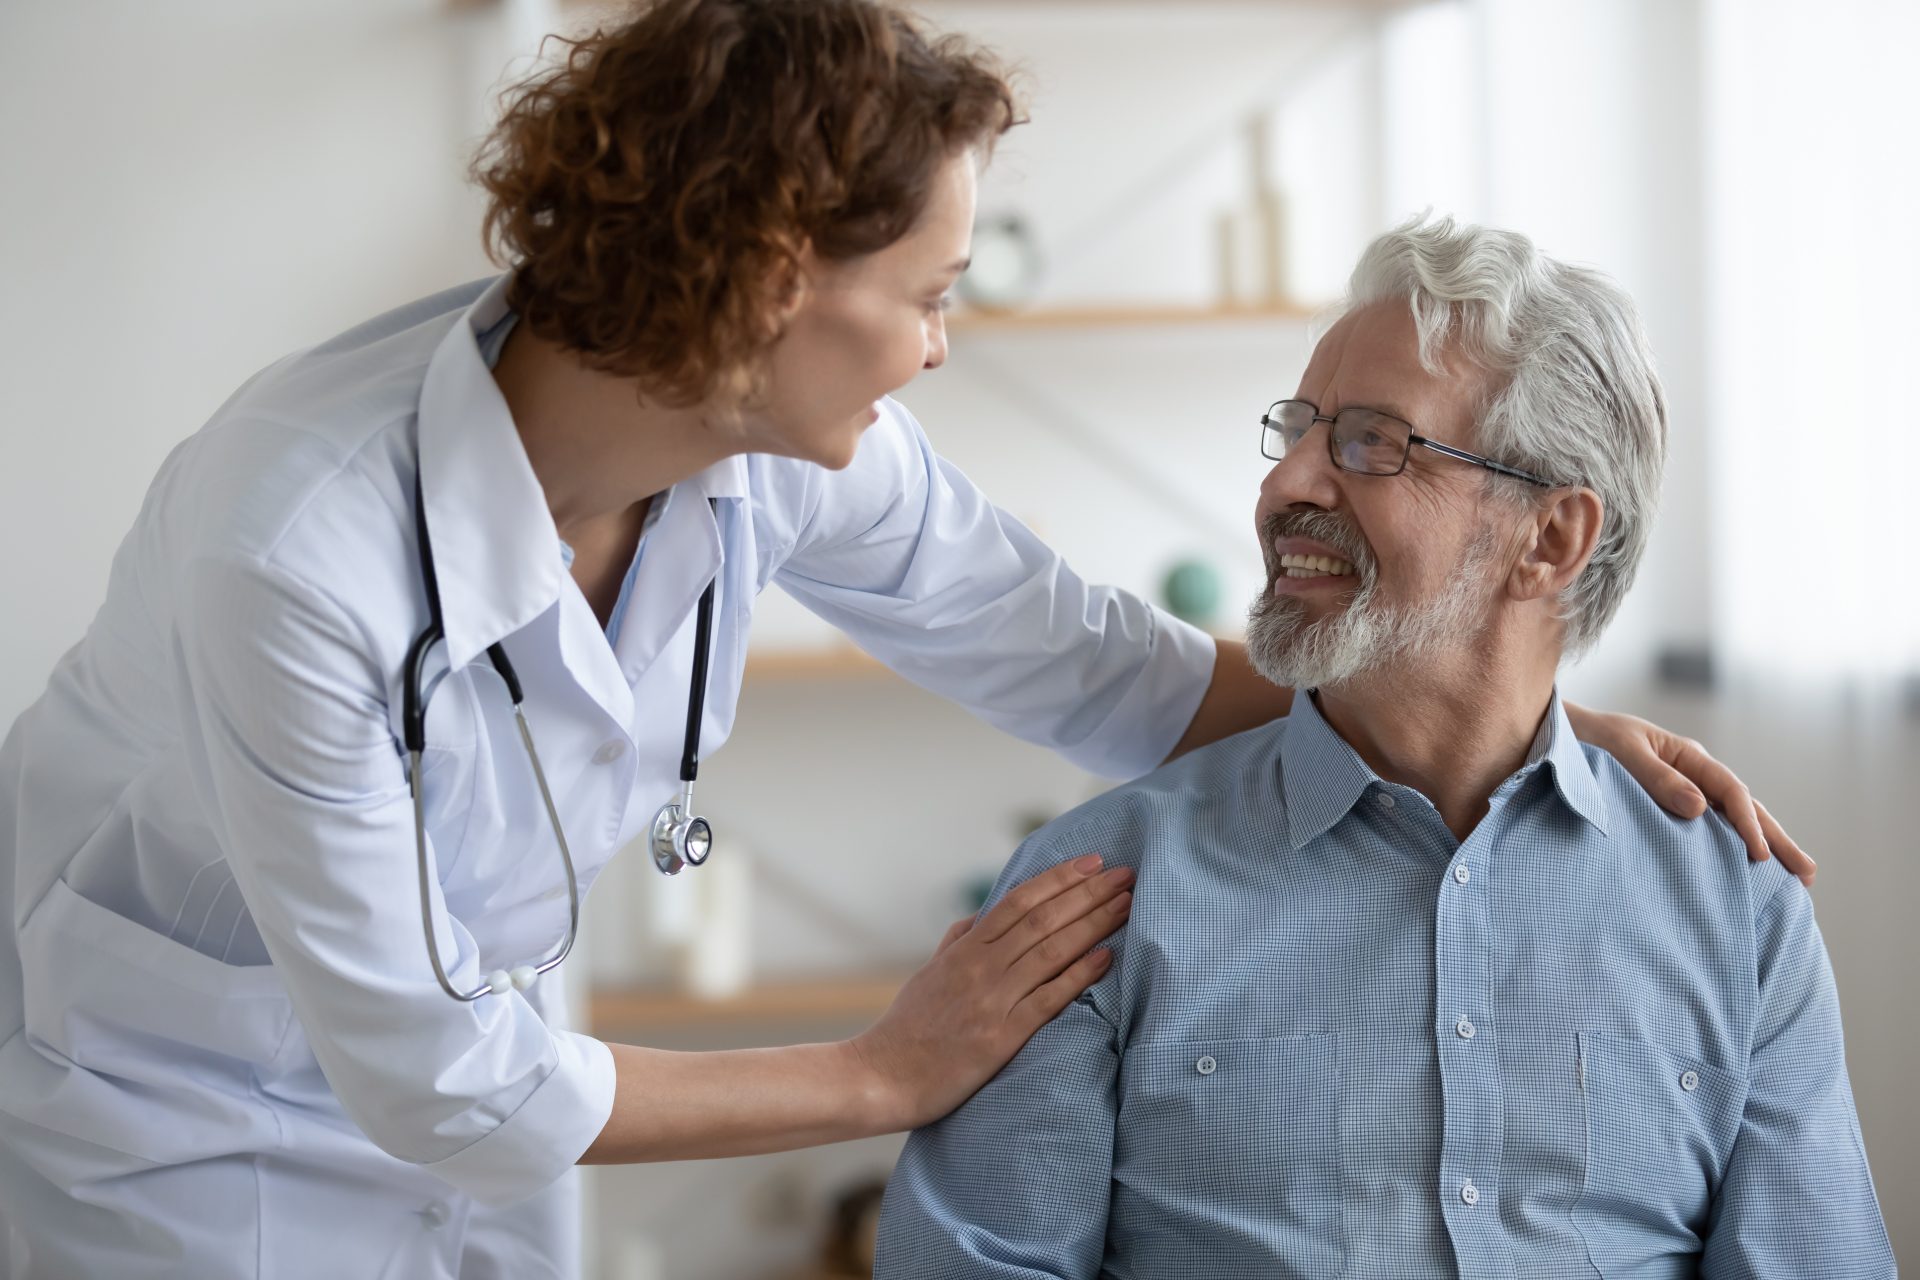 Smiling young nurse caregiver supporting mature patient during homecare visit, friendly woman doctor wearing white uniform with stethoscope touching senior man shoulders, psychological help